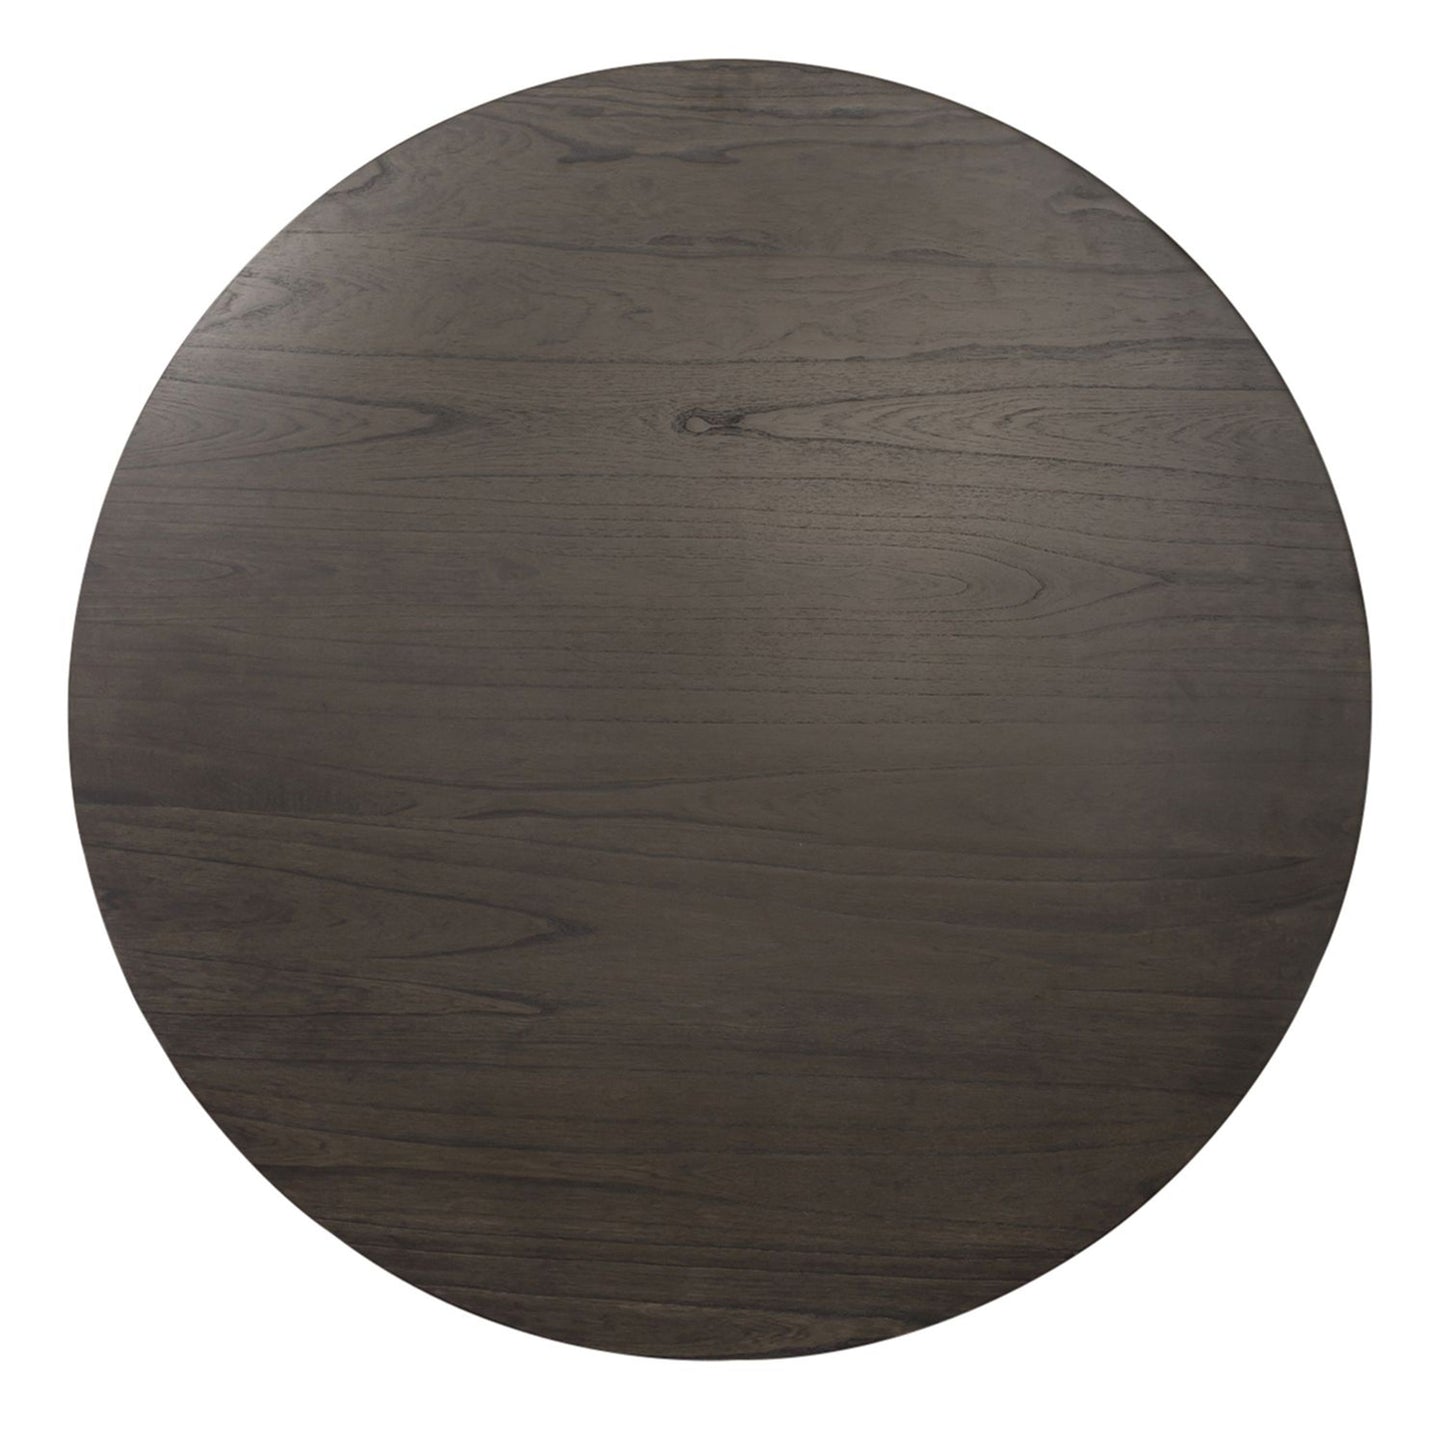 Almeta Transitional Round Dining Table with Crisscross X Base - Dark Umber Brown Finish